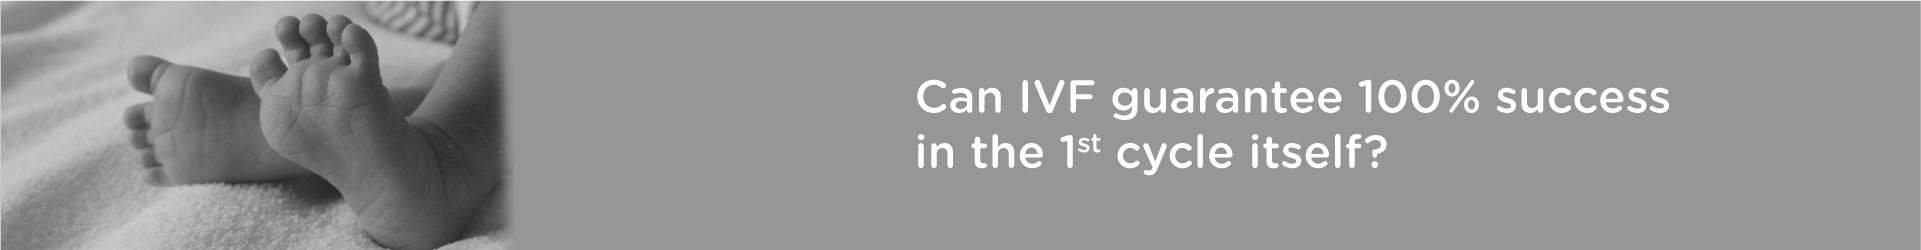 Can IVF guarantee 100% Success in its 1st cycle itself?